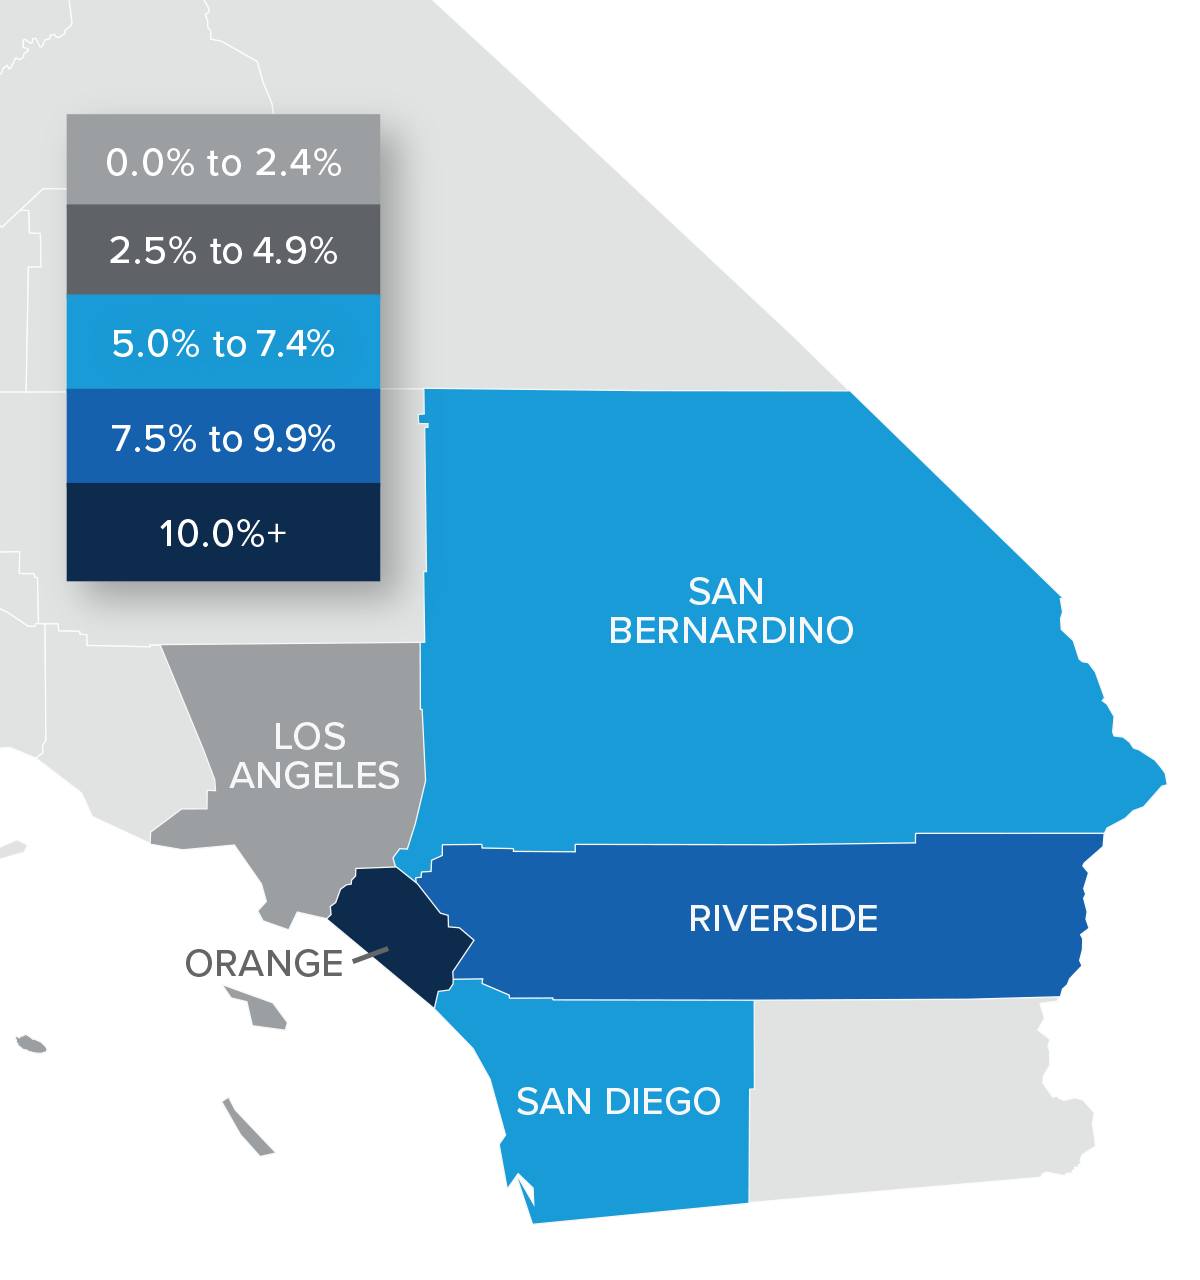 A map showing the real estate home prices percentage changes for various counties in Southern California. Different colors correspond to different tiers of percentage change. Los Angeles County has a percentage change in the 0% to 2.4% range. San Bernardino and San Diego are in the 5% to 7.4% change range, Riverside is in the 7.5% to 9.9% range, and Orange is in the 10%+ range.